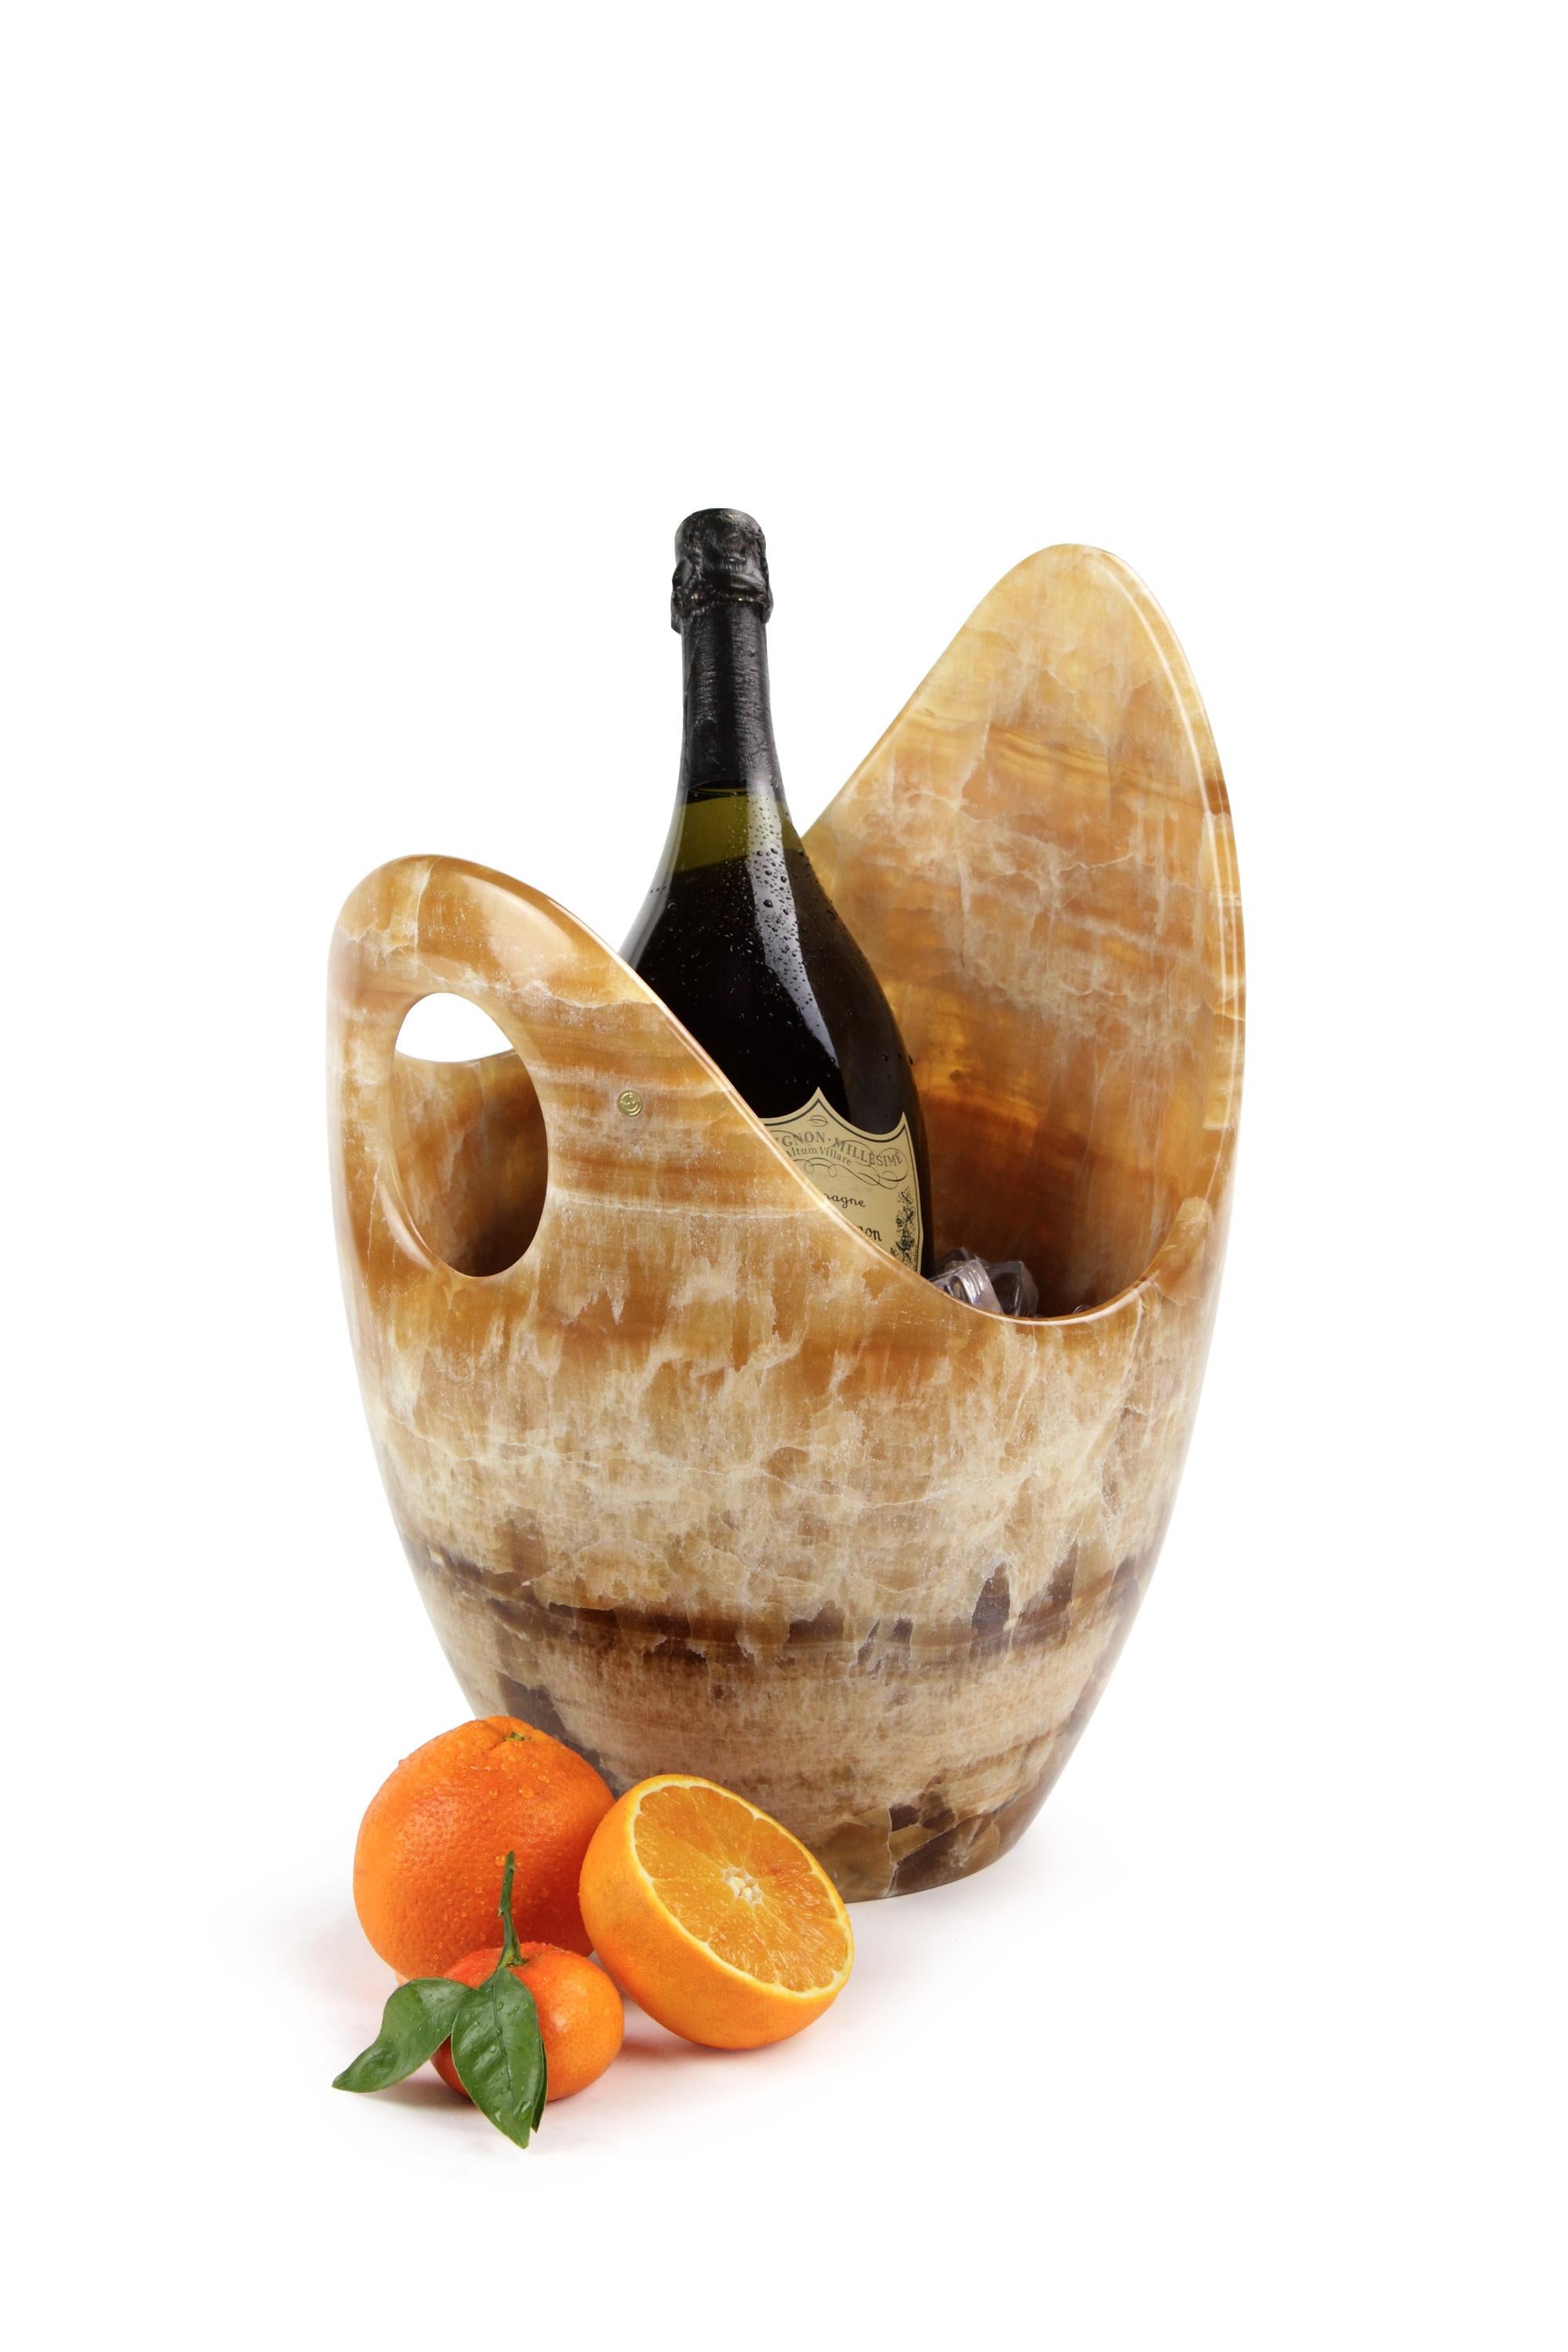 Luxurious and big Champagne bucket sculpted by hand from a solid block of amber onyx. The polished finishing underlines the transparency of the onyx making this a very precious object. 

Champagne bucket dimensions: D 26 x H 41 cm. Available in